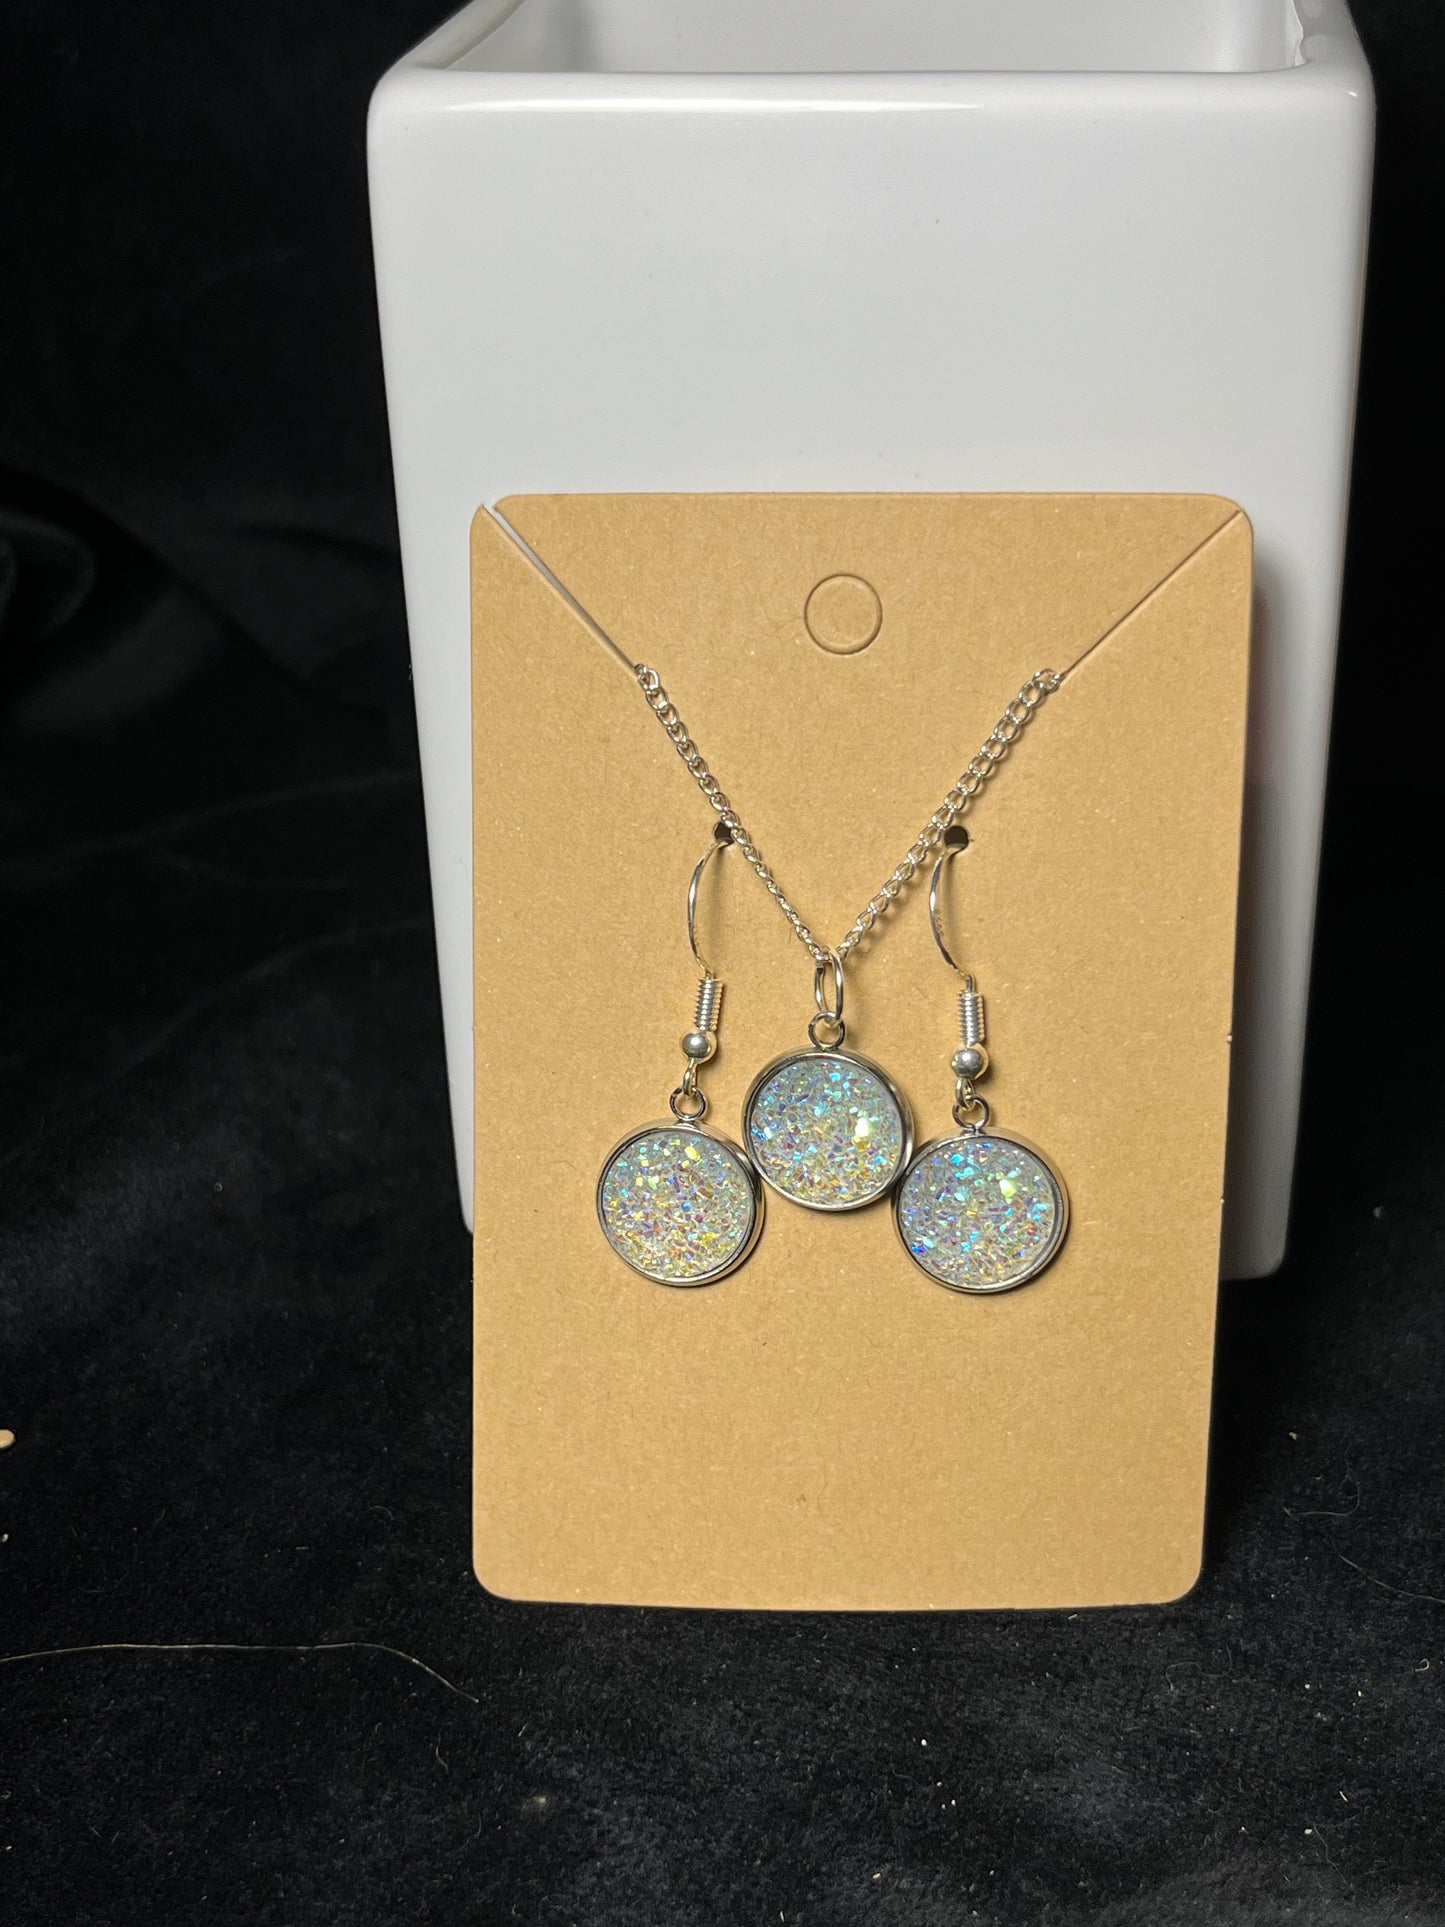 Sparkly Round Cabochon on a silver Chain Necklace with Matching Stud Earrings